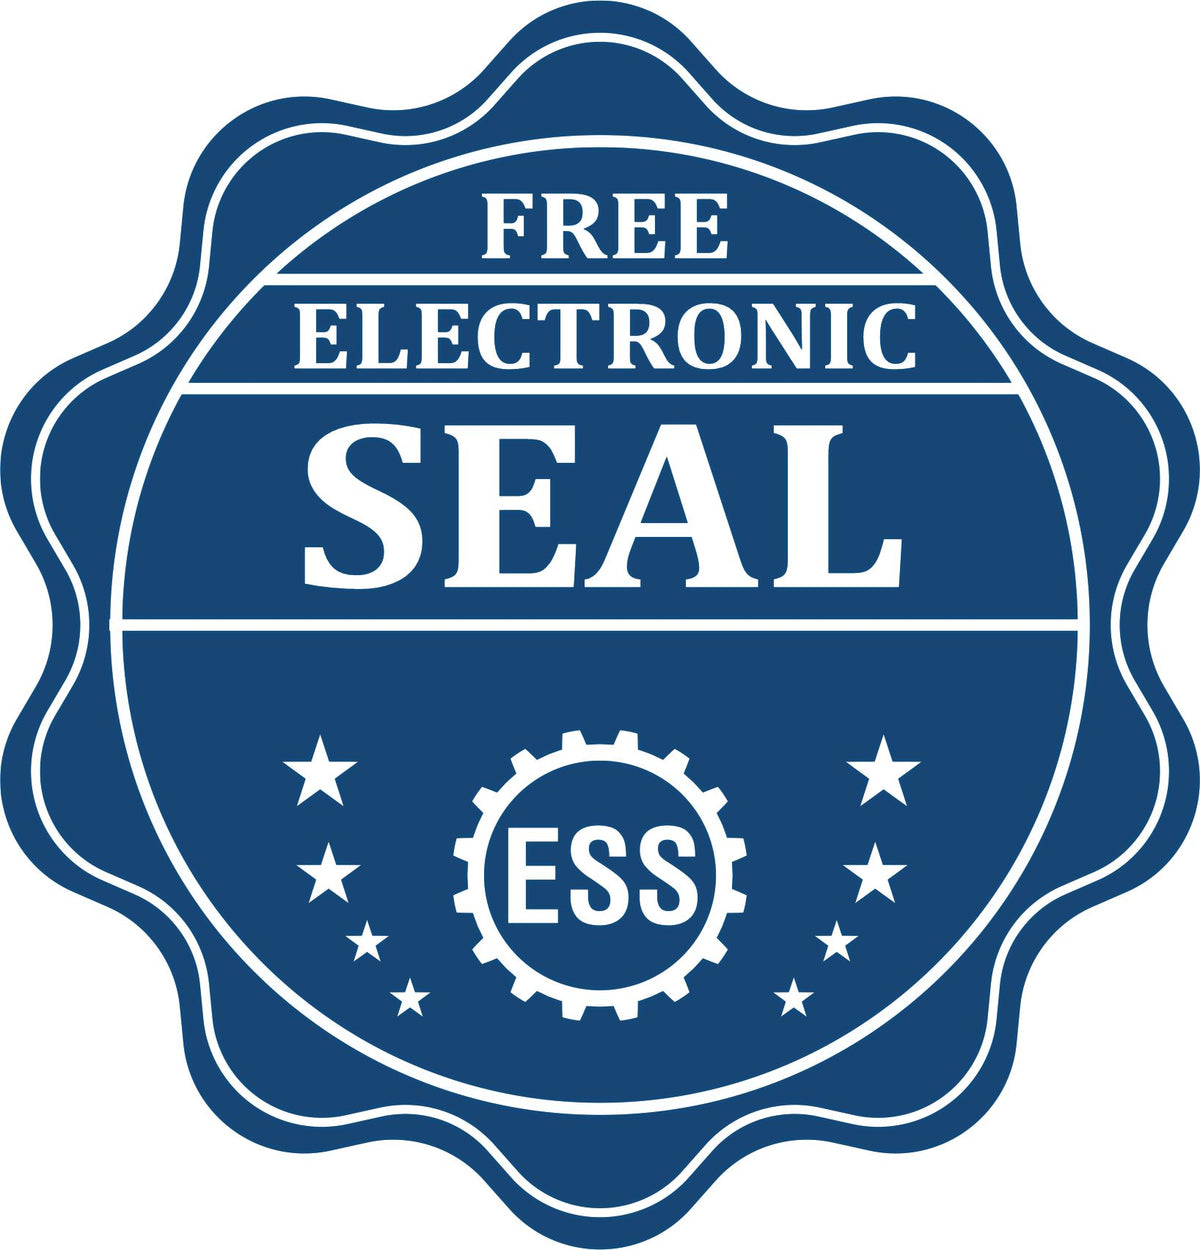 A badge showing a free electronic seal for the Gift Michigan Land Surveyor Seal with stars and the ESS gear on the emblem.